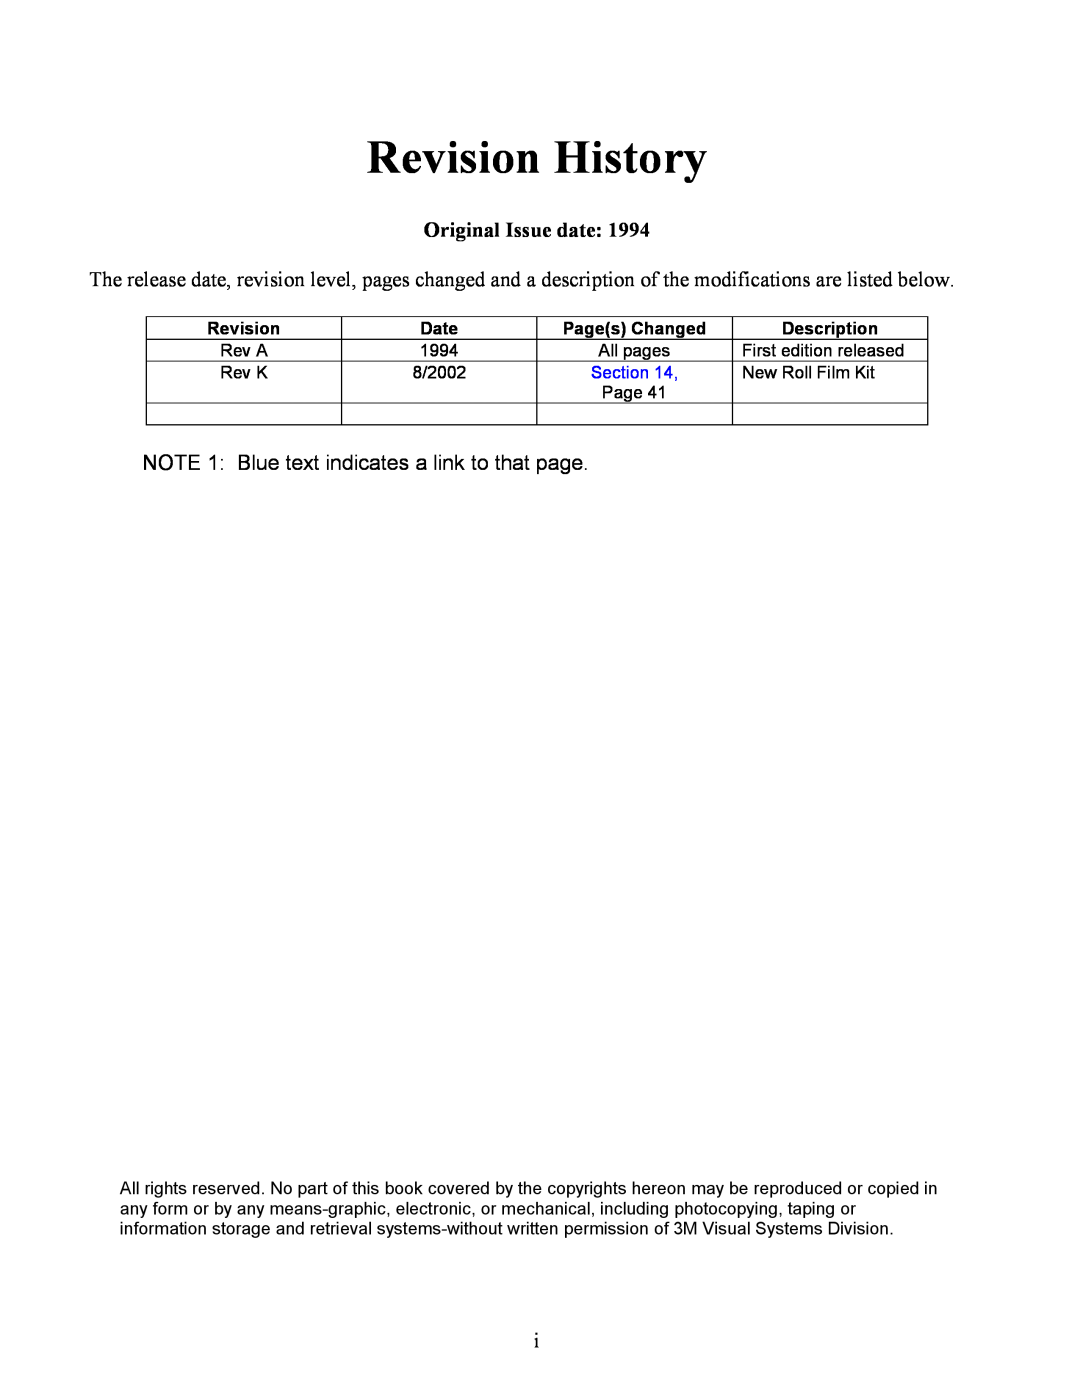 Xerox 9080 Revision History, Original Issue date, NOTE 1 Blue text indicates a link to that page, Date, Pages Changed 